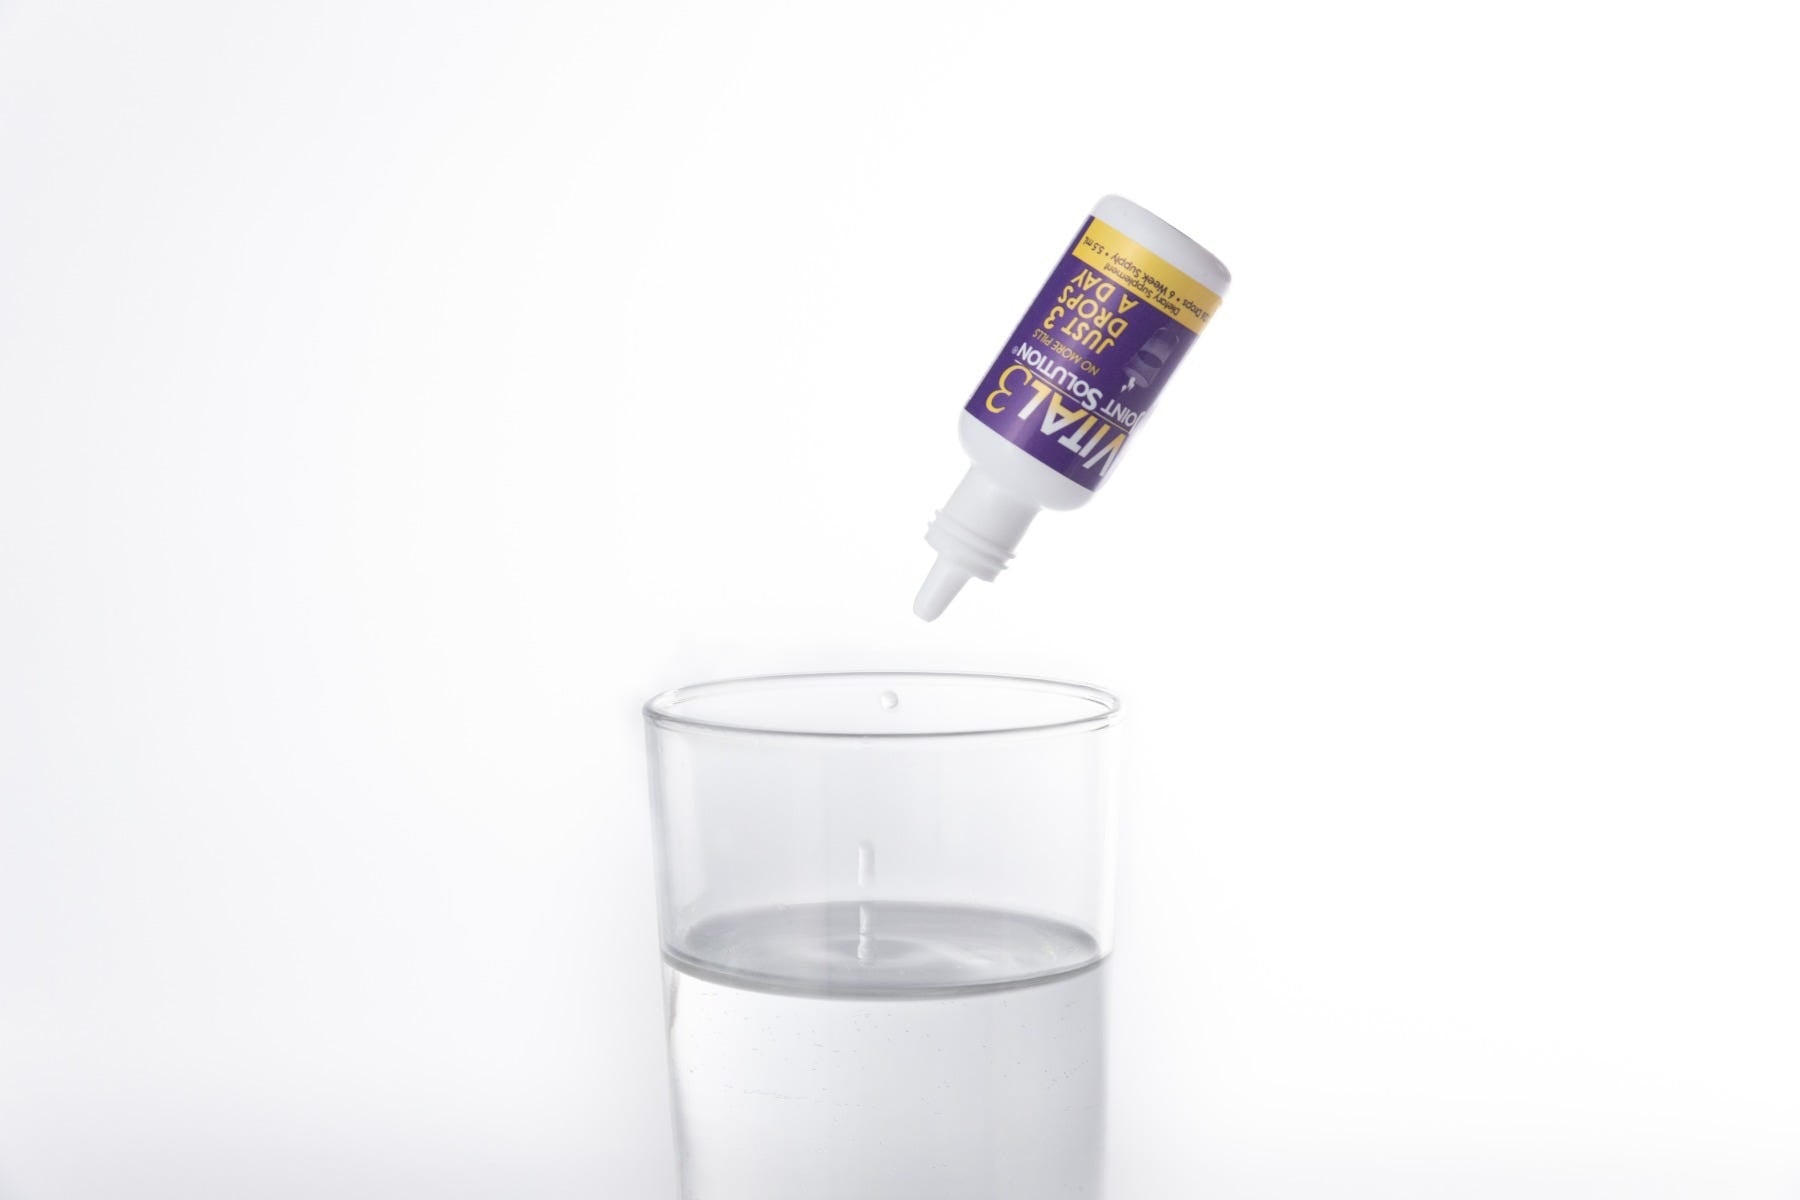 Vital3 Joint Solution® Liquid Clinically Proven - 5.5 mL view 5 of 11